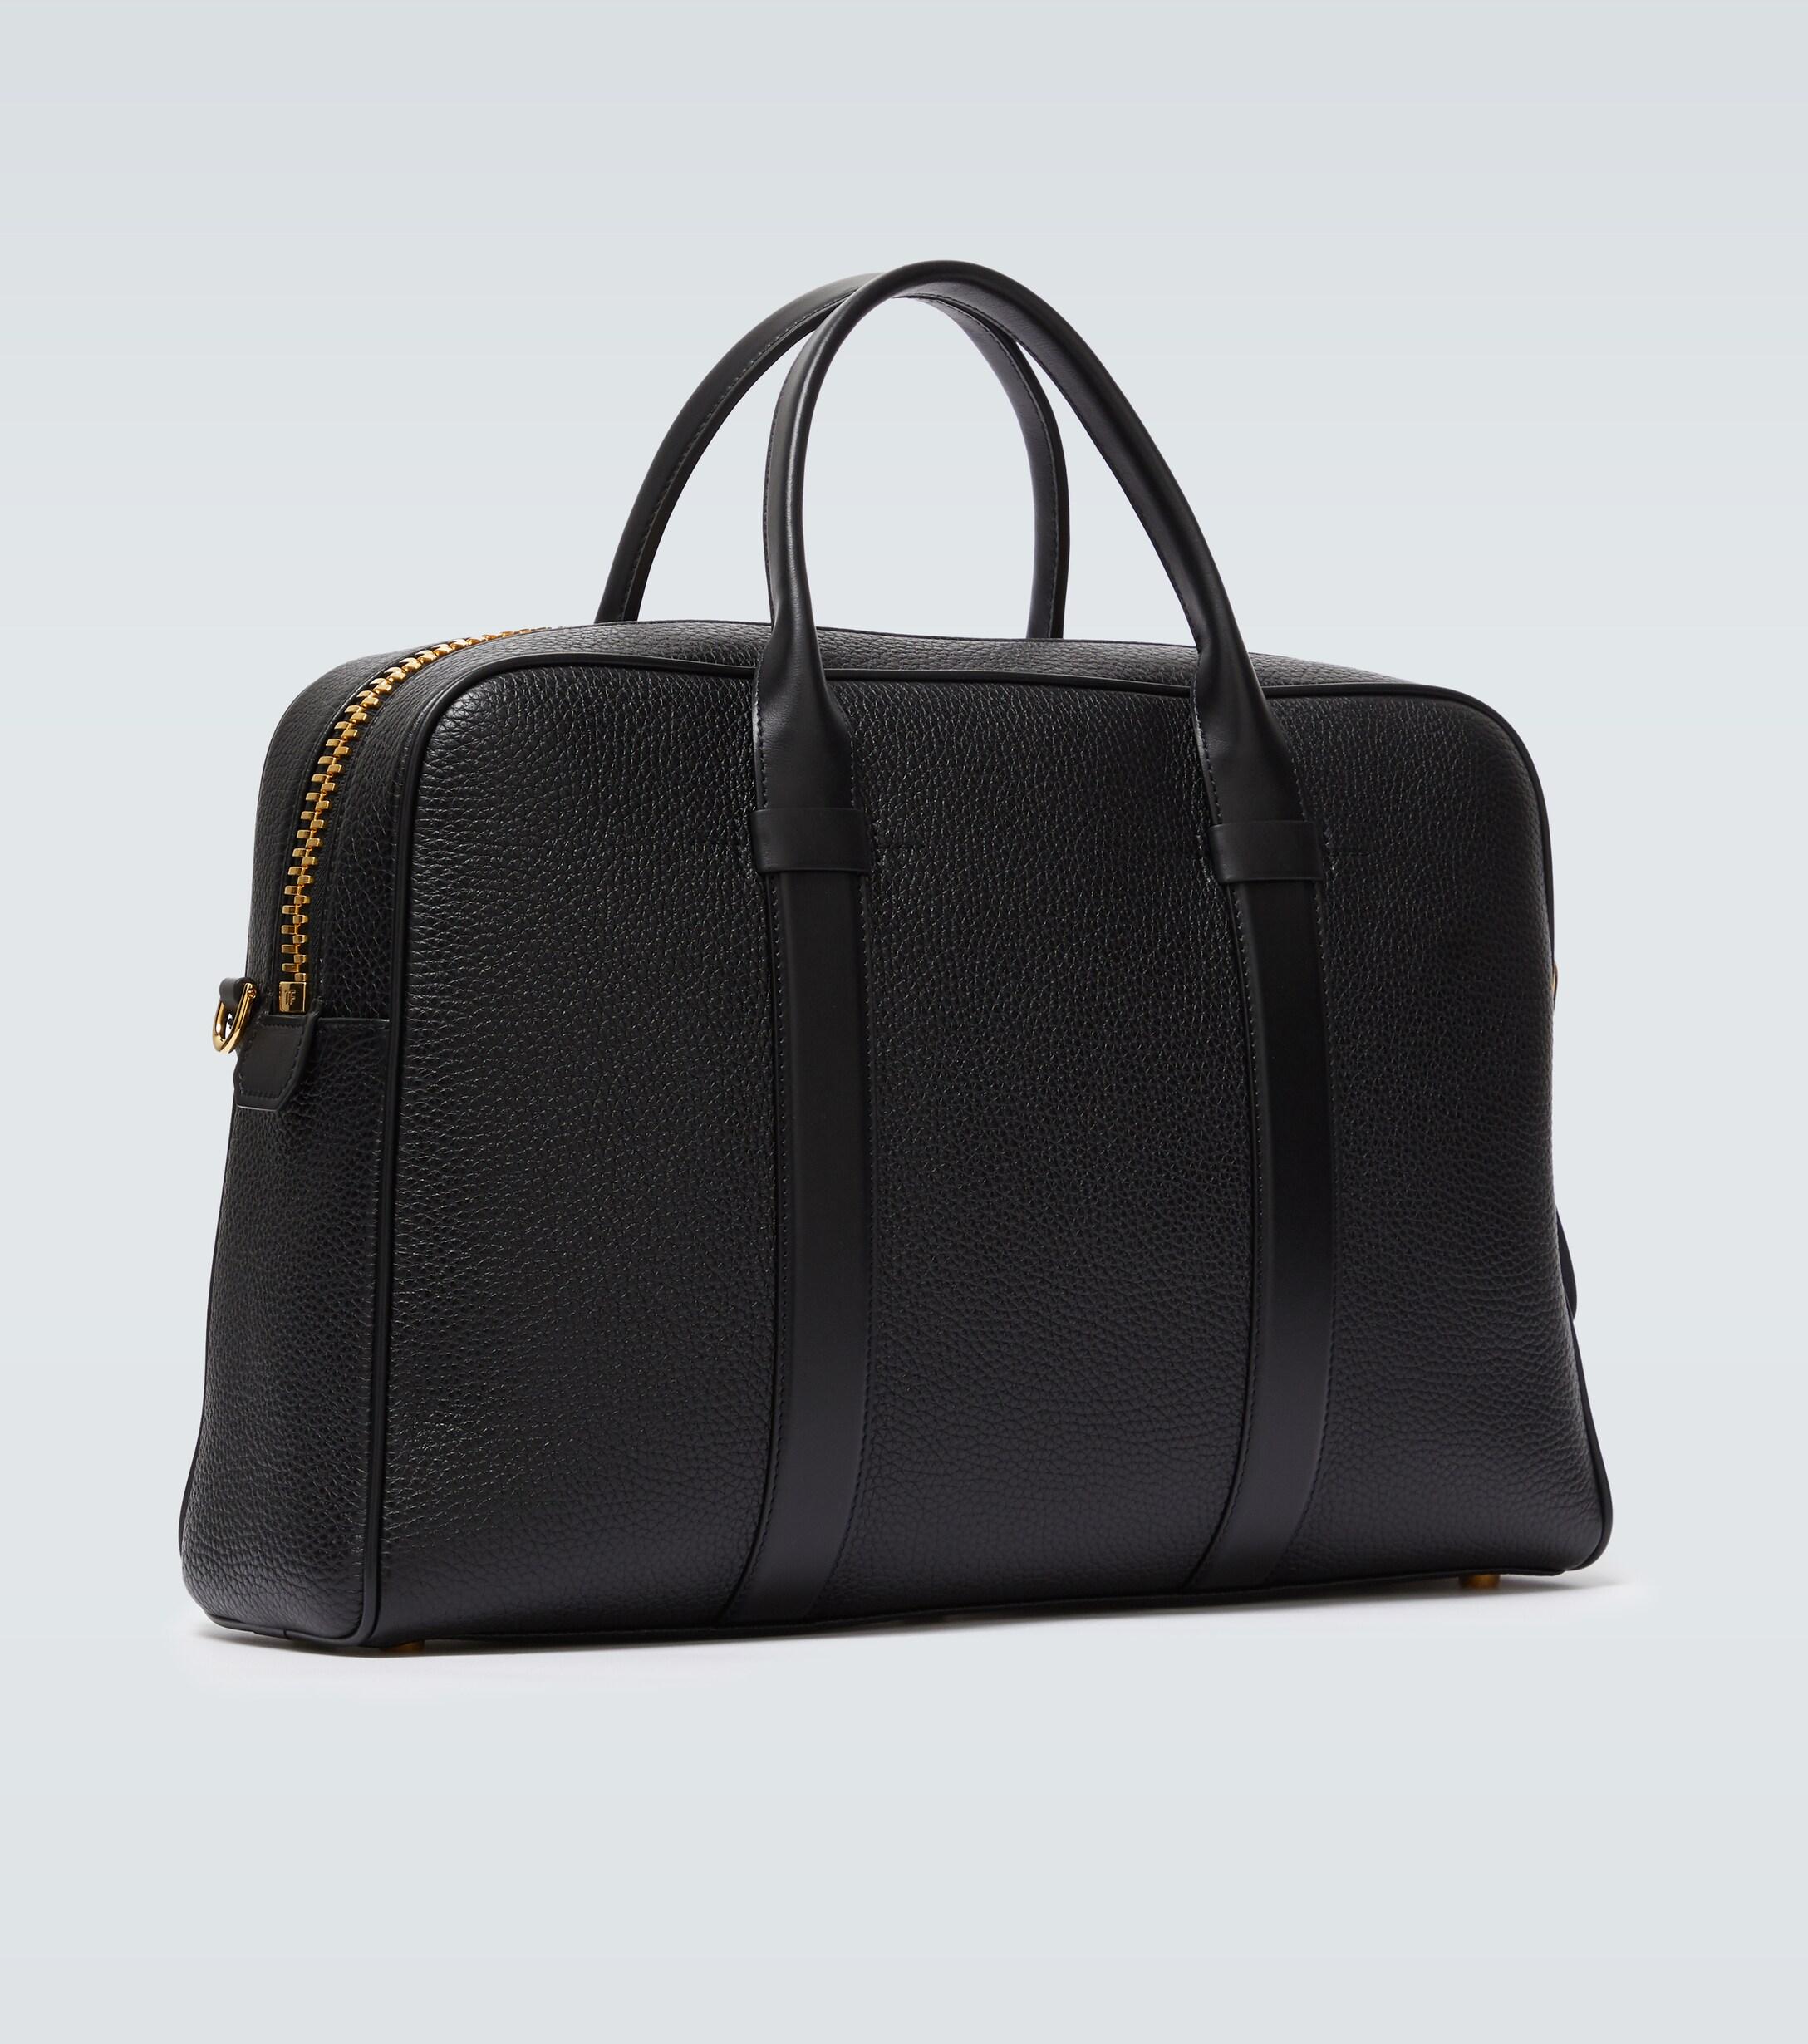 Tom Ford Buckley Leather Briefcase in Black for Men - Lyst